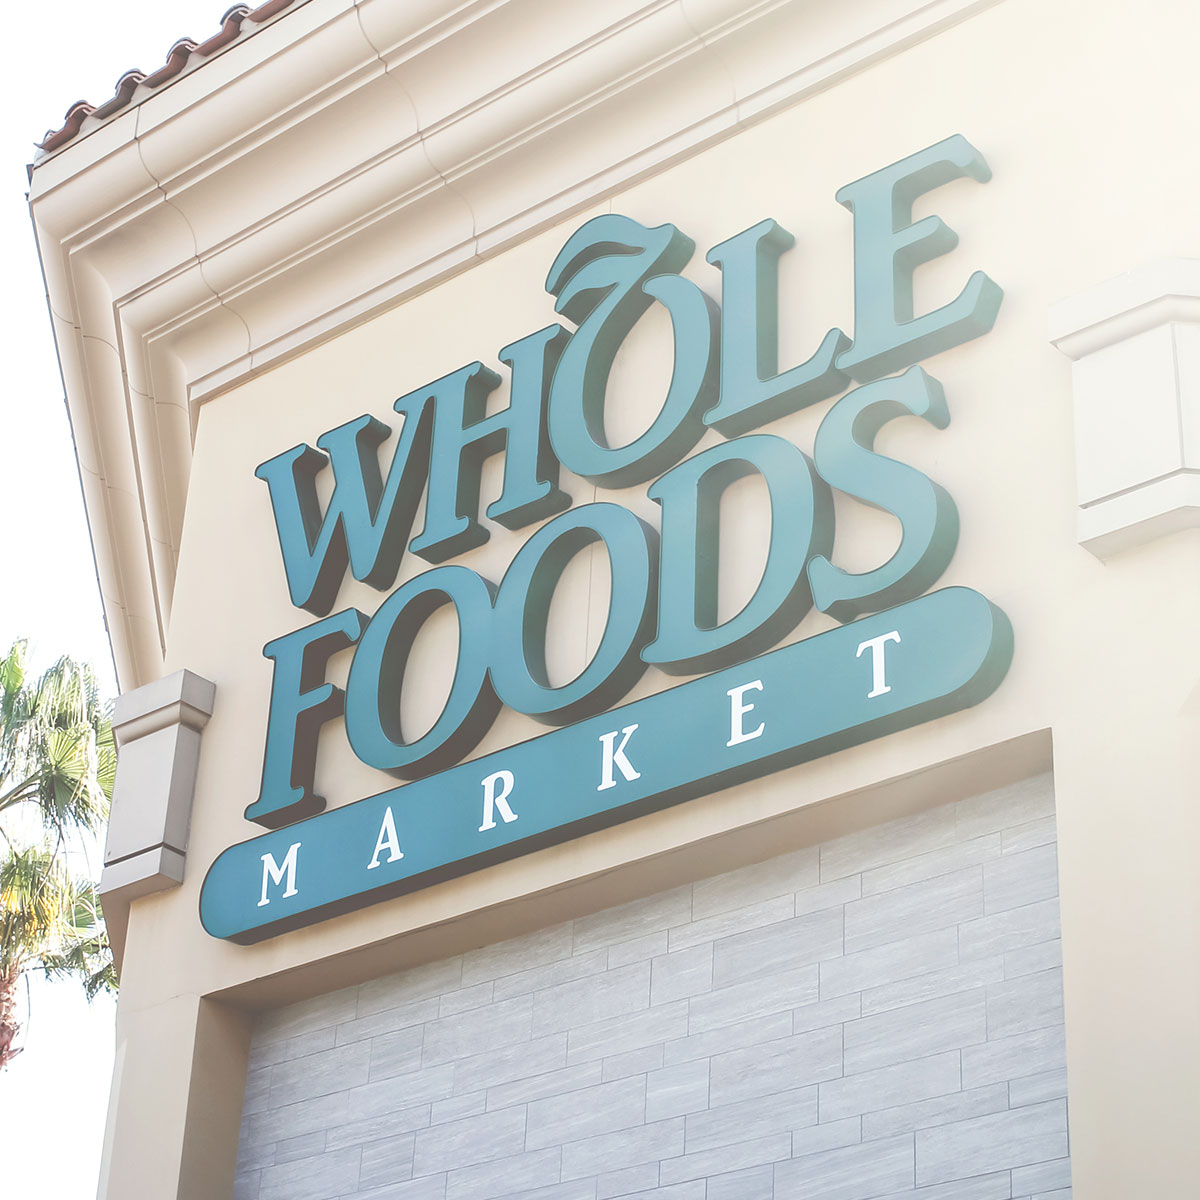 Customers Complain About Whole Foods Prepared Foods After